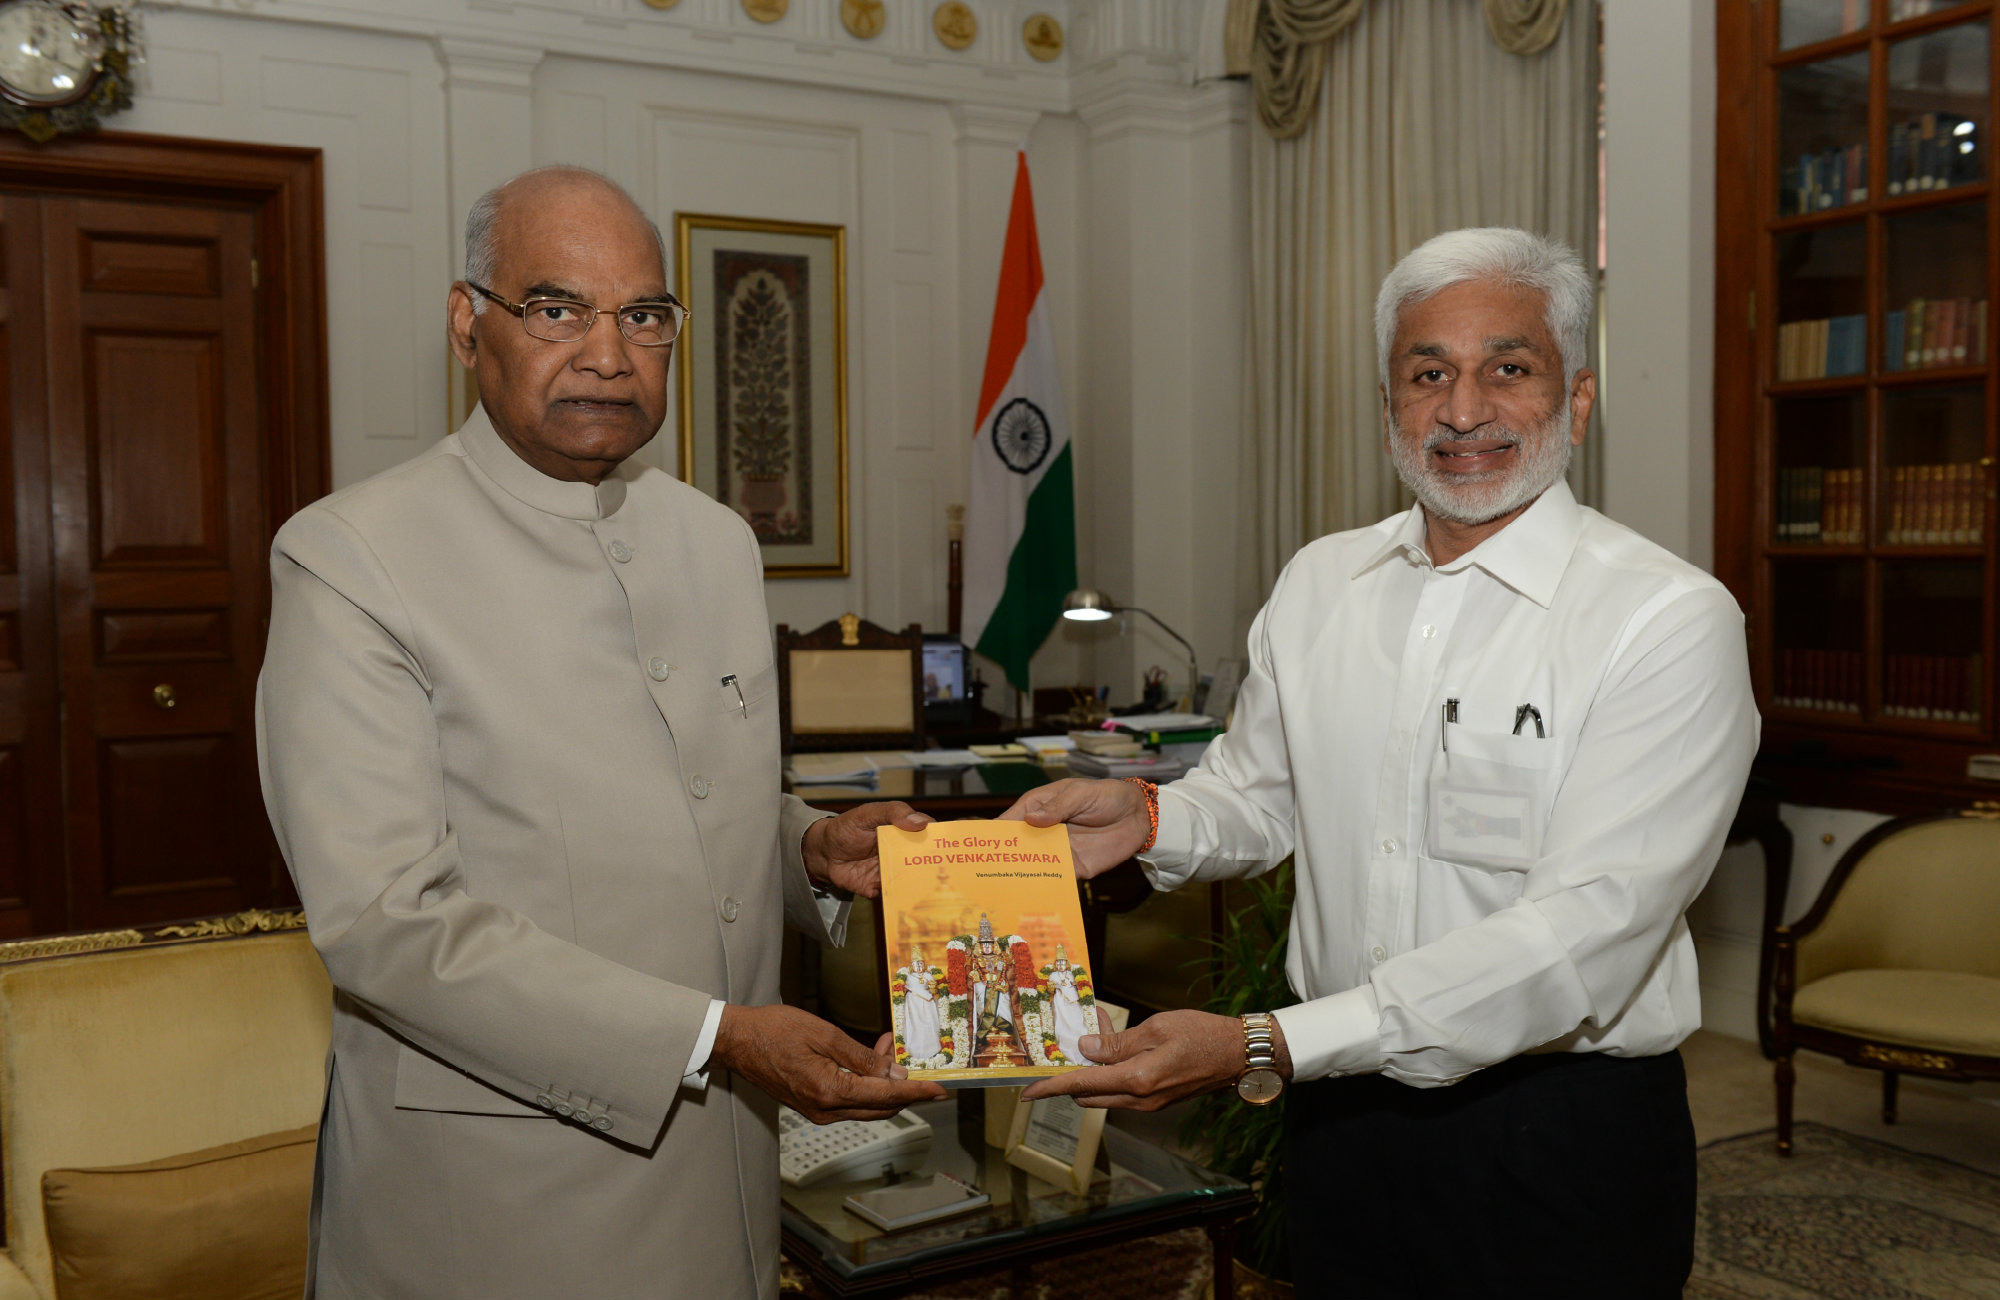 Meeting with His Excellency Shri Ram Nath Kovind ji, Hon'ble President of India at Rashtrapati Bhawan on 4th of July 218 to present my book.